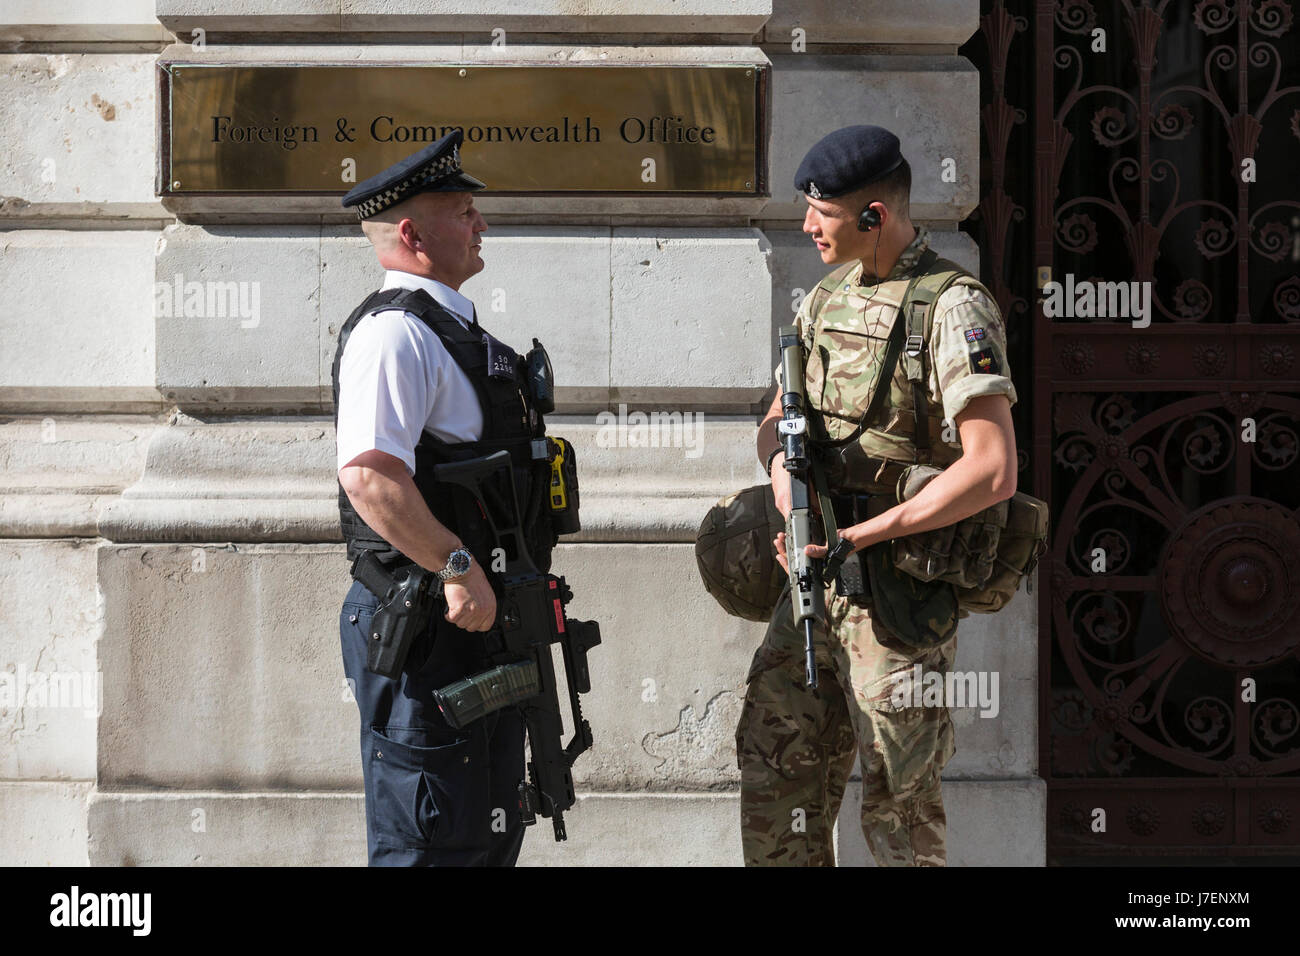 London, UK. 24 May 2017. An armed police officer and a soldier guard the Foreign & Commonwealth Office in Westminster. Soldiers have been deployed to Westminster in the wake of the terrorist attack in Manchester.  Photo: Vibrant Pictures/Alamy Live News Stock Photo